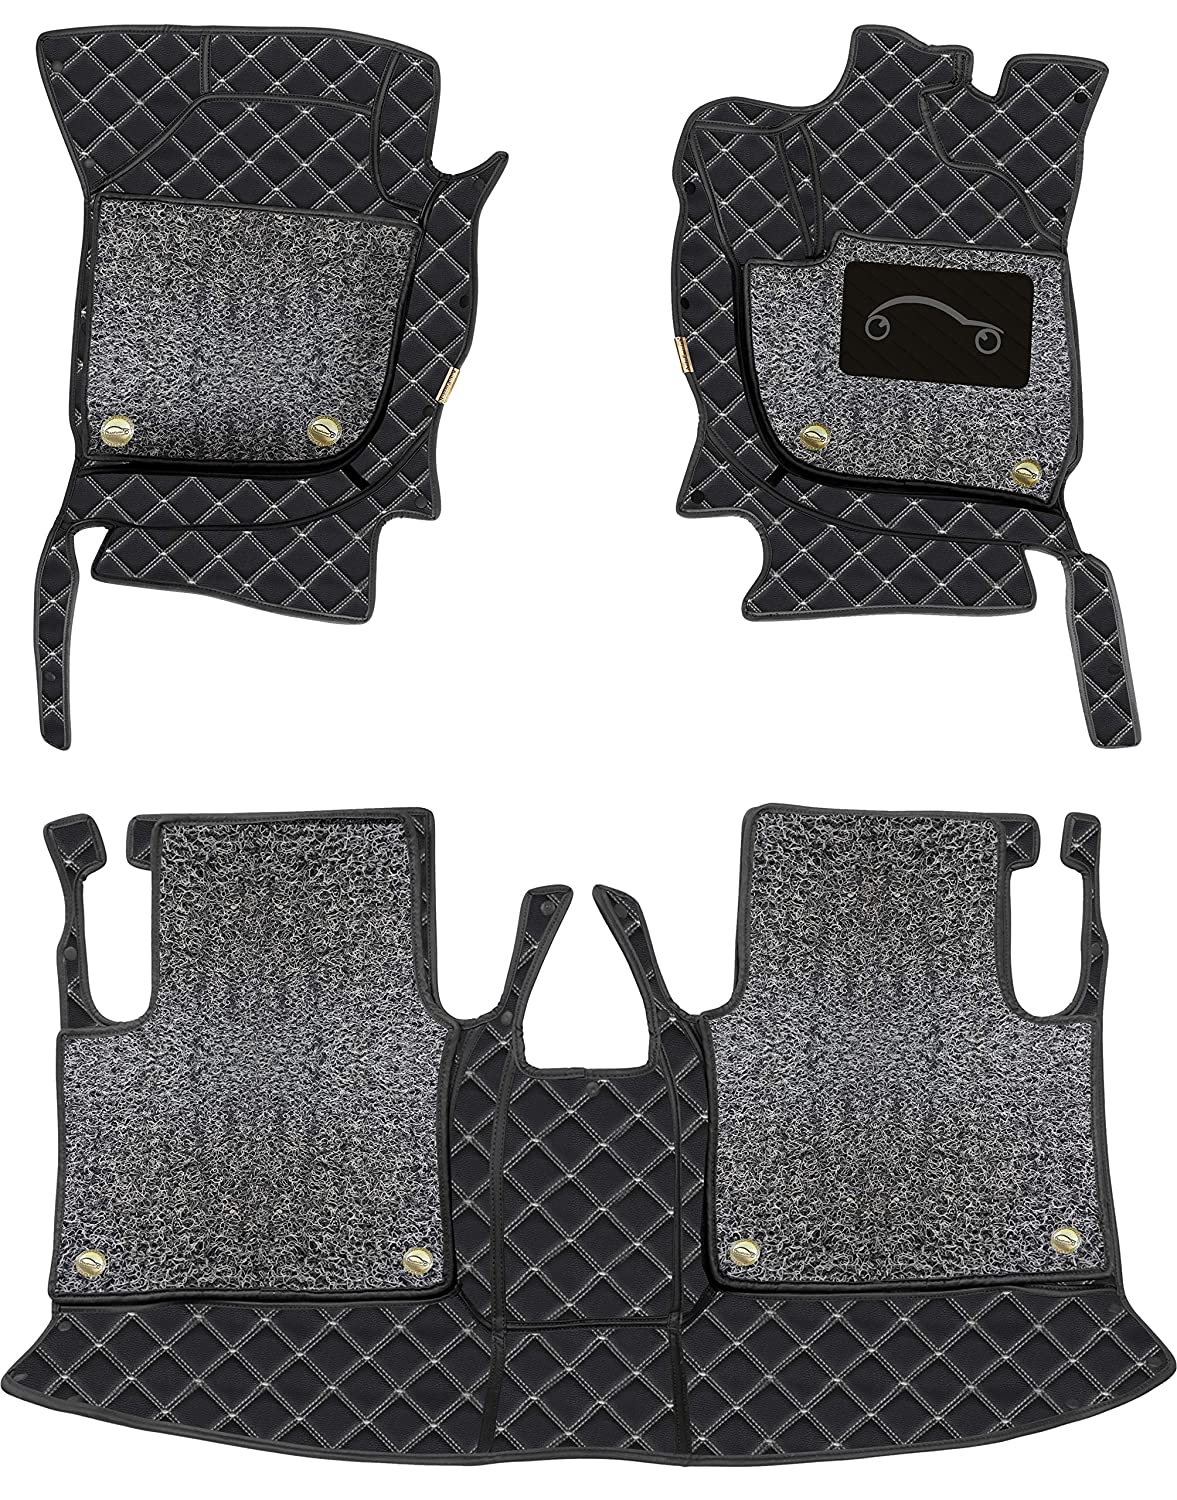 7d-luxury-car-footmats-for-volkswagen-Polo GT-2013-18-custom-designed-pu-leather-with-7-layer-depth-24mm-2-rows